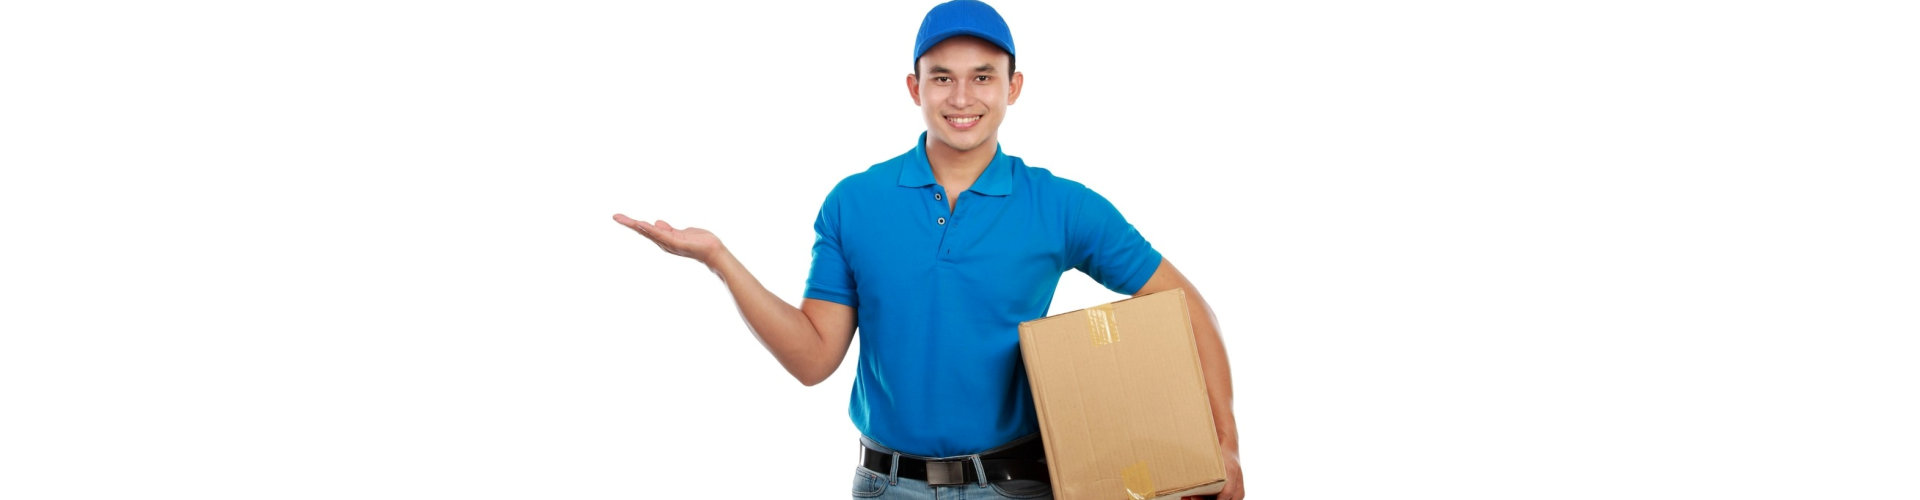 delivery boy smiling